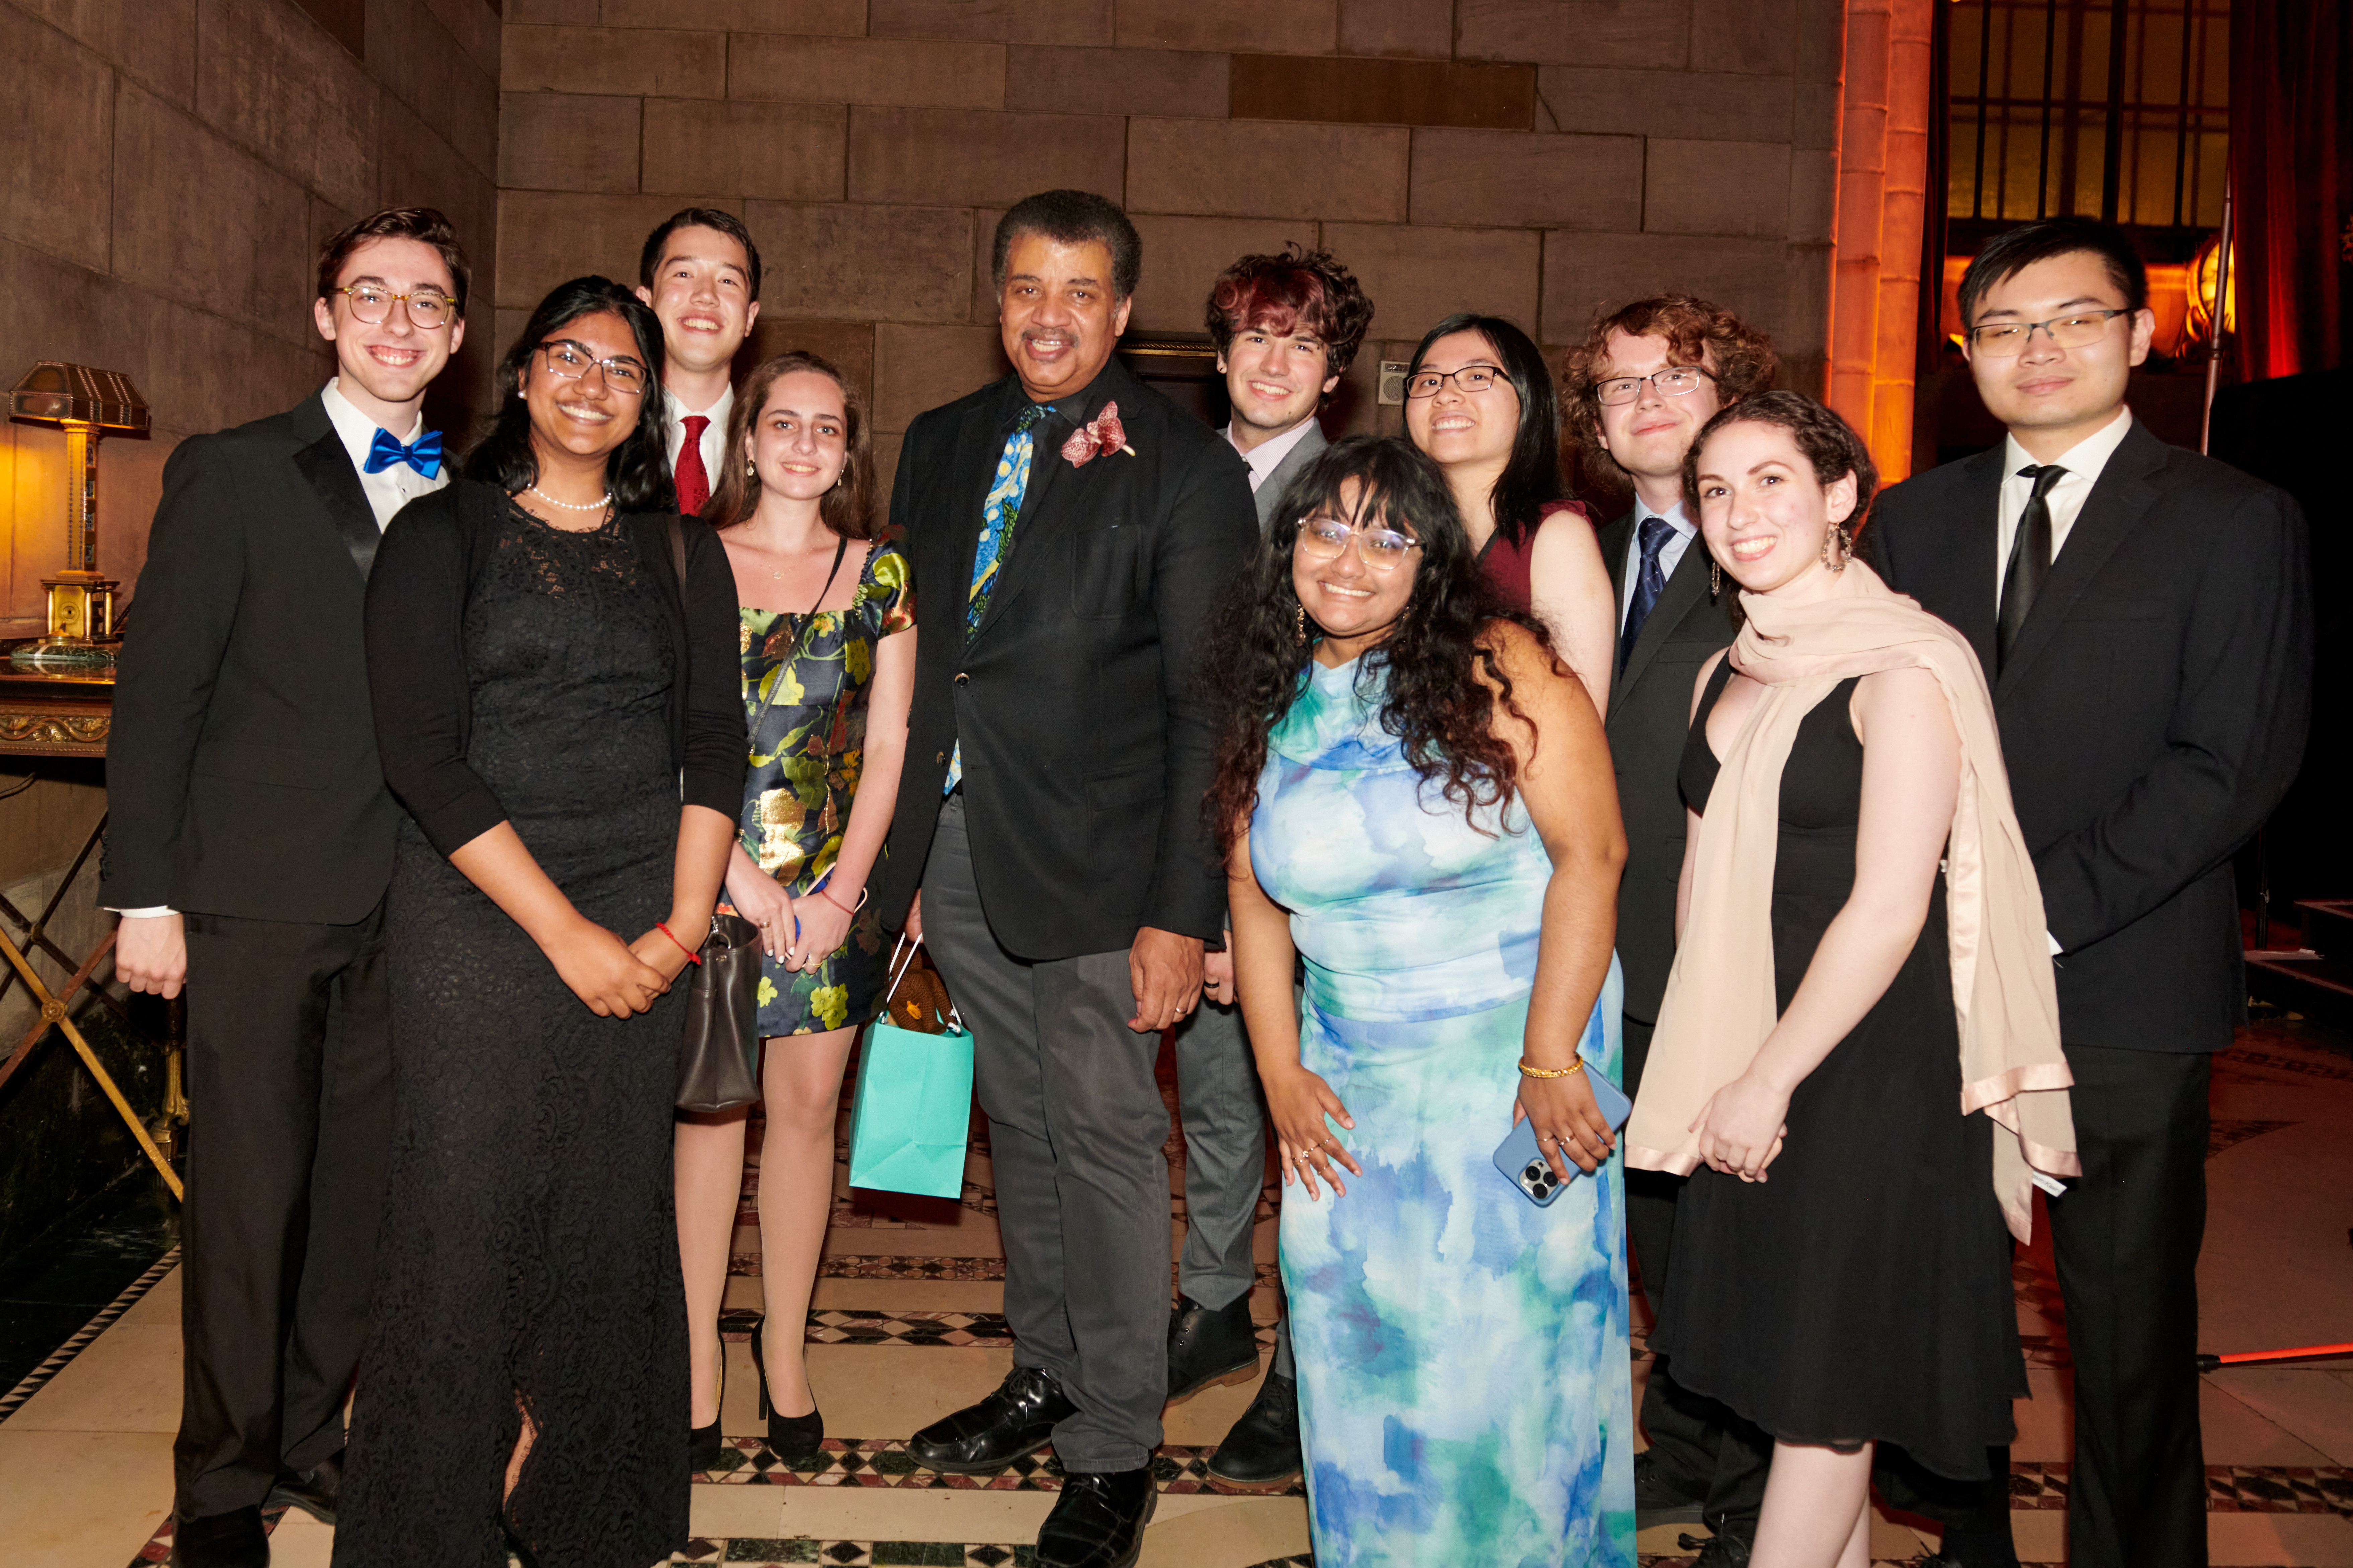 The current Stony Brook Trustee Scholars with Neil deGrasse Tyson. (Photo by Juliana Thomas)